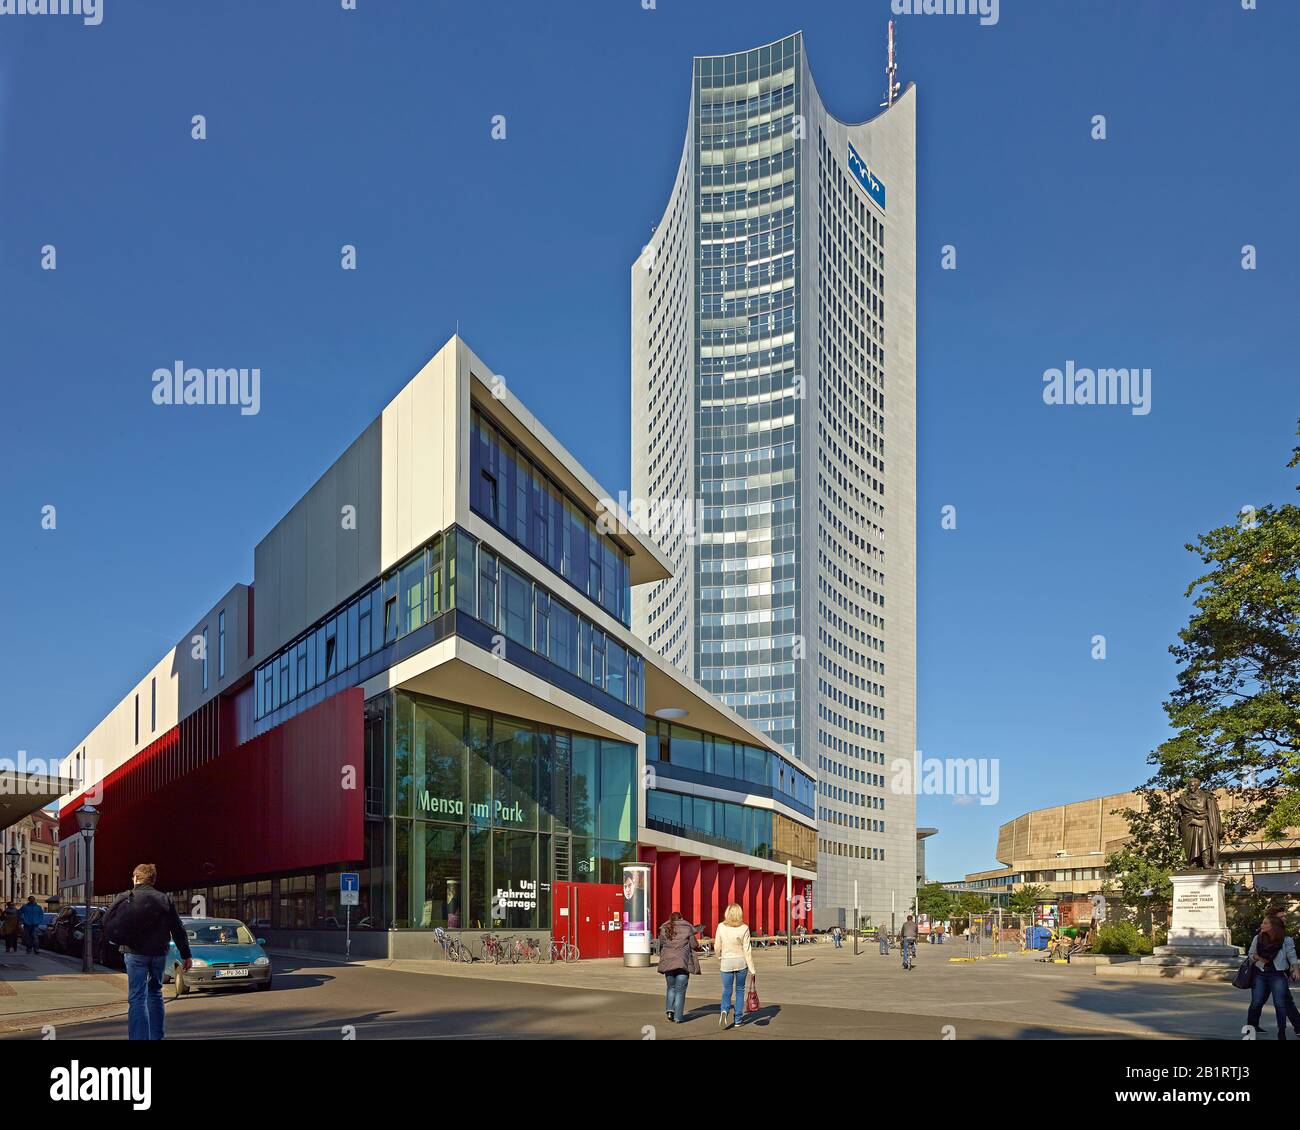 New university cafeteria with high-rise building in Leipzig, Saxony, Germany Stock Photo